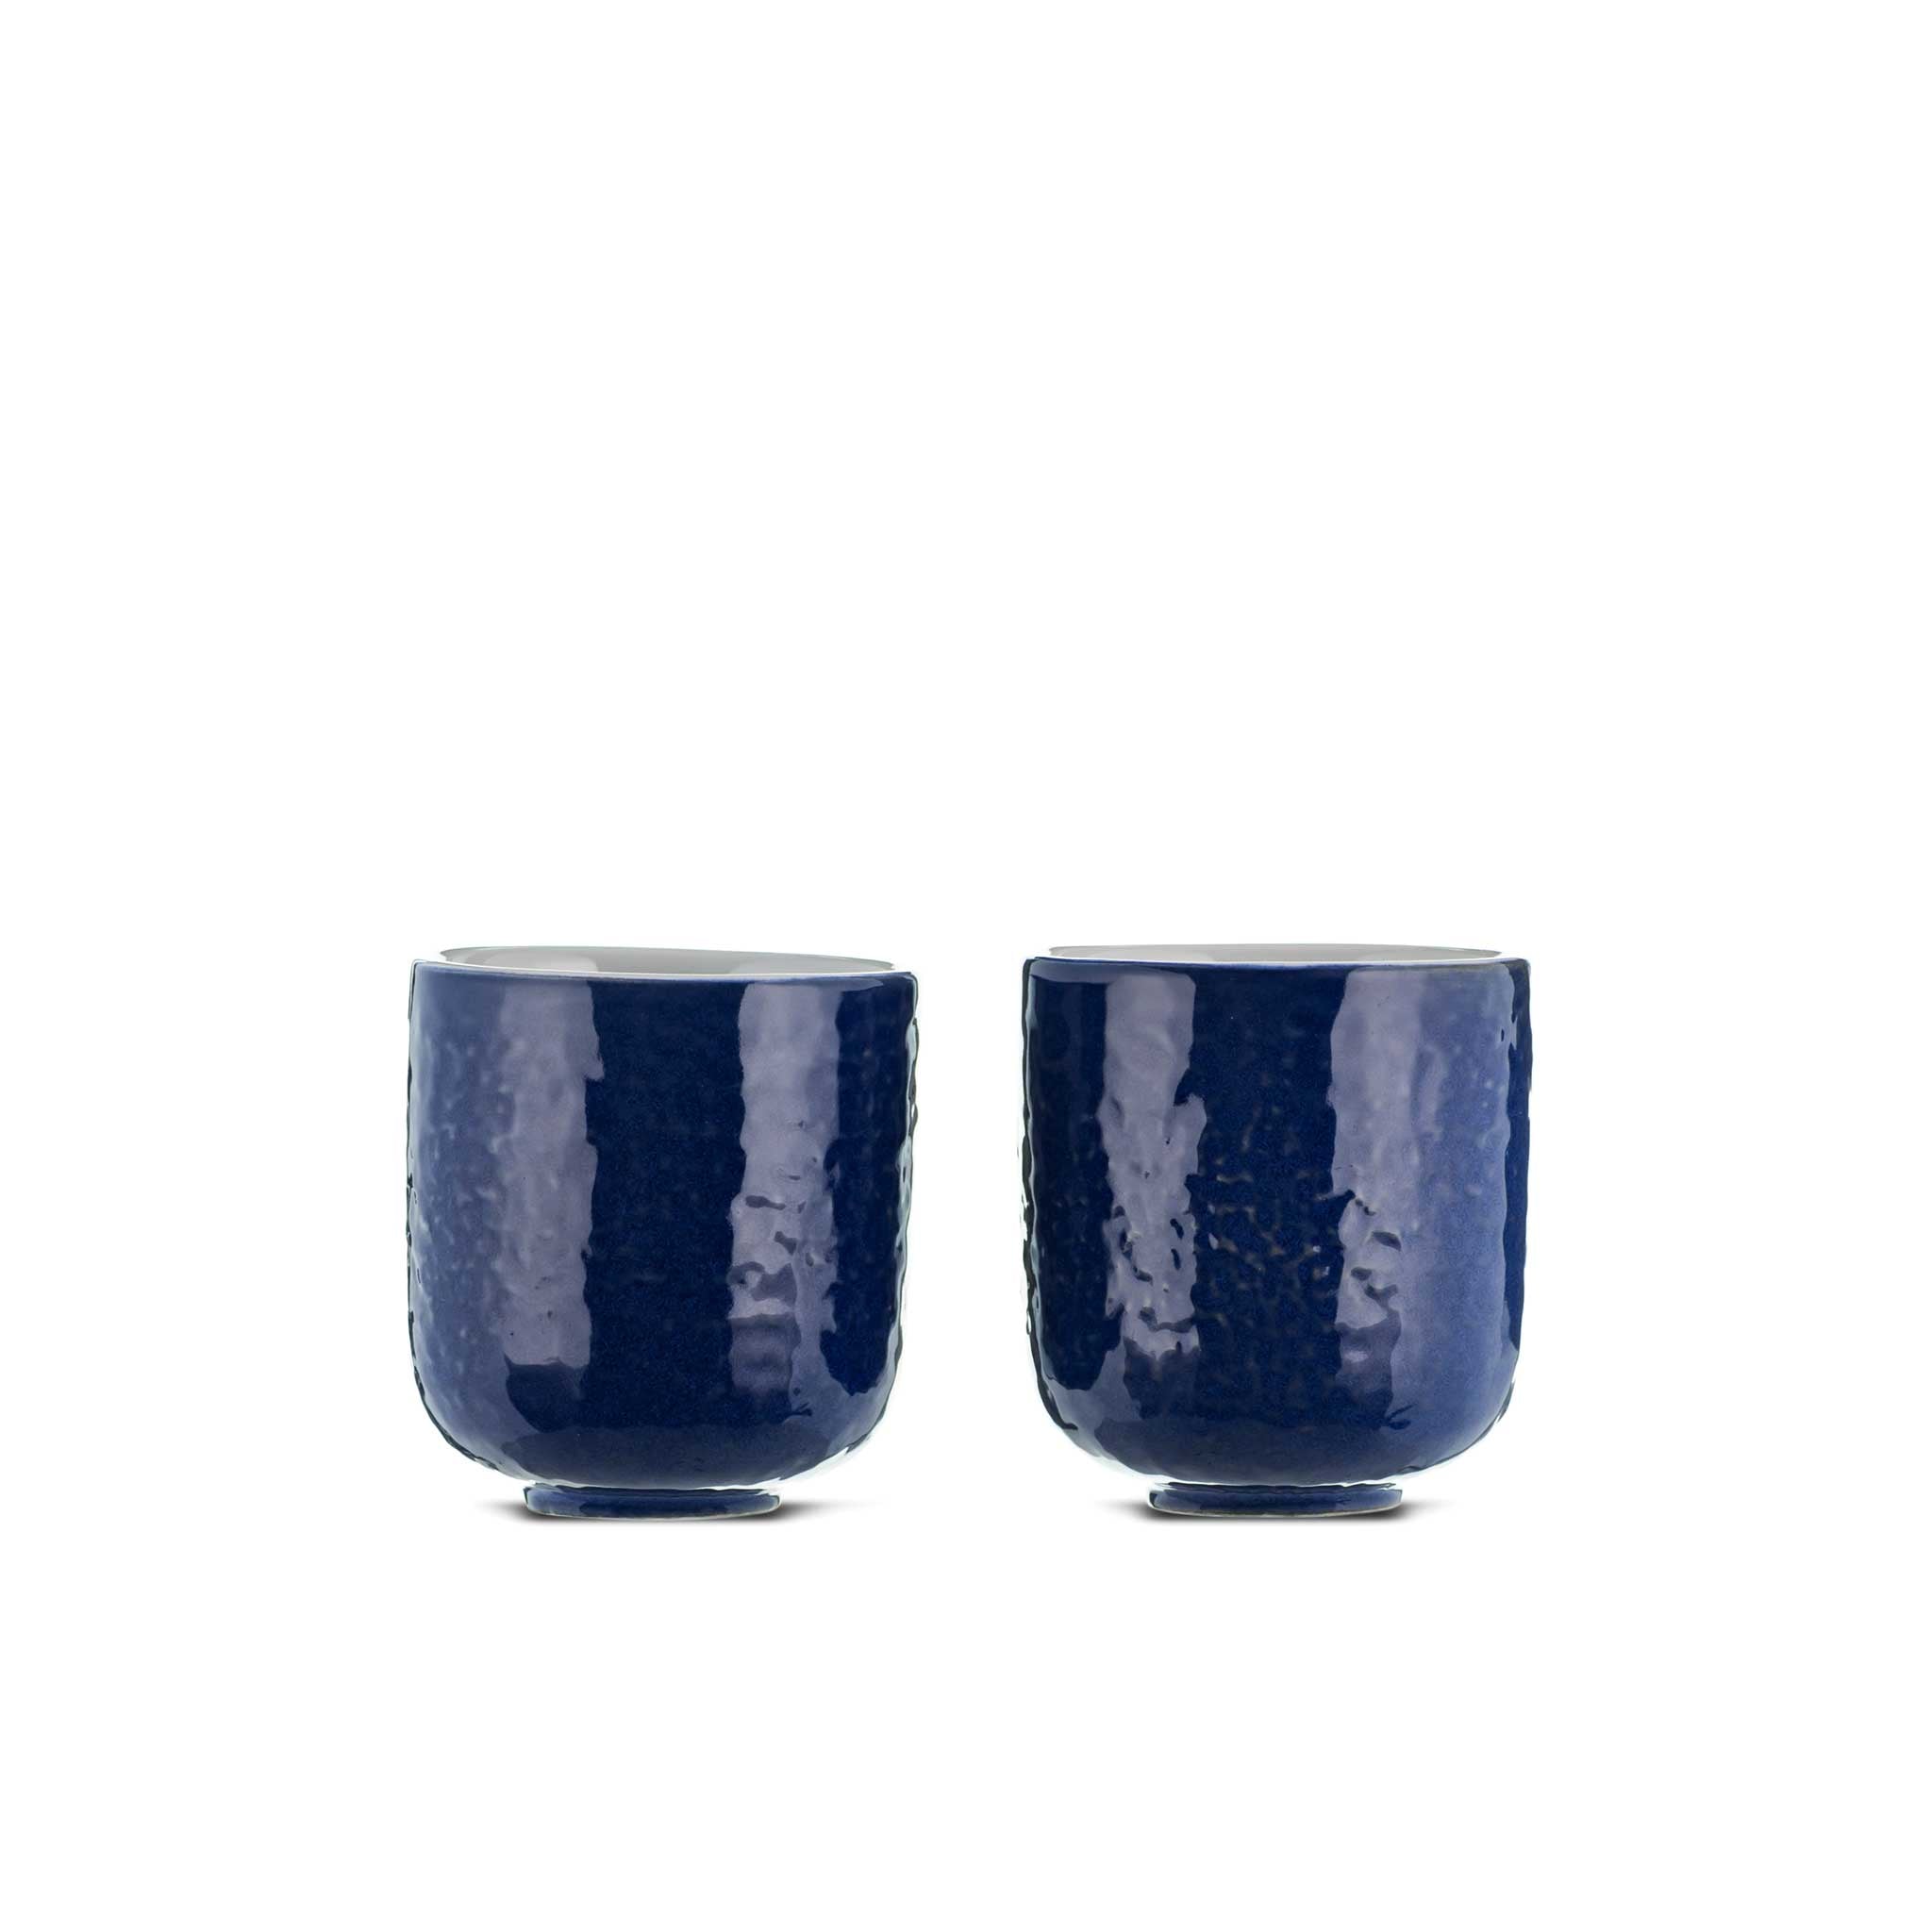 Blue Oriental tea cups from China Blue